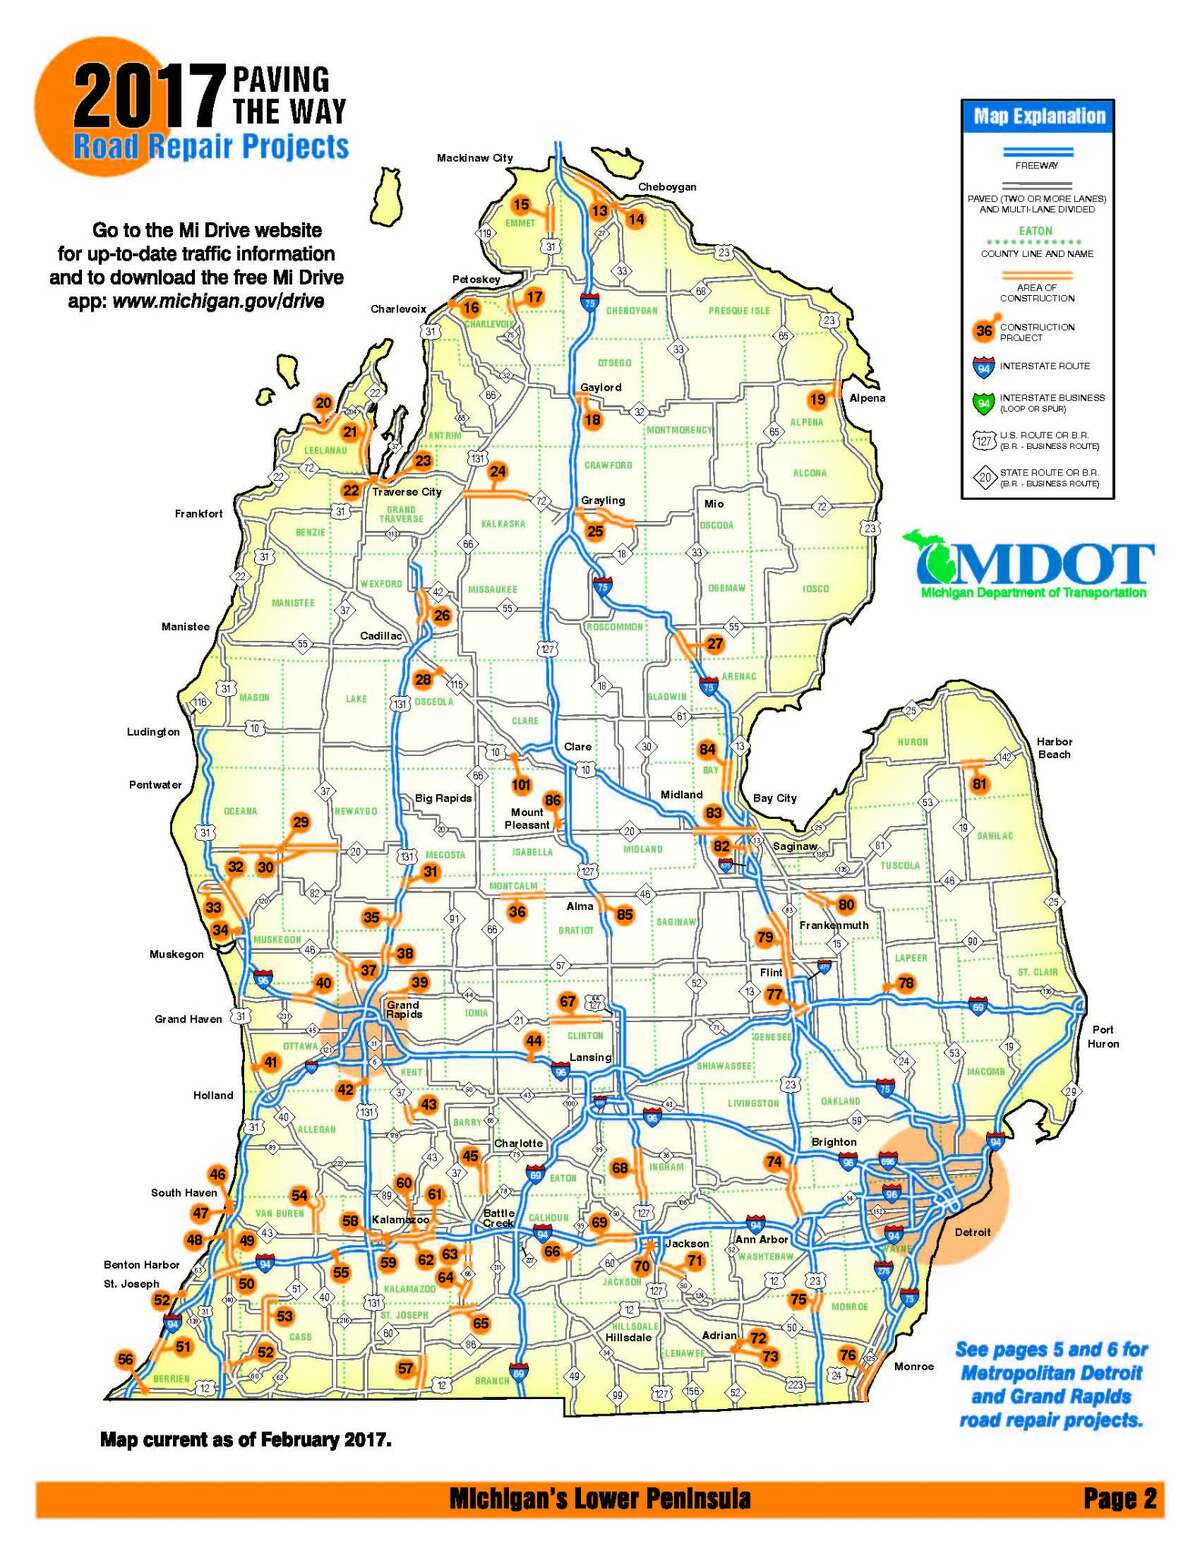 MDOT's 2017 construction projects map. Download the full Michigan map at www.michigan.gov/mdotmaps Get current construction info for state roads using the Mi Drive website at www.michigan.gov/drive or the Mi Drive app, available on iTunes and Google Play.